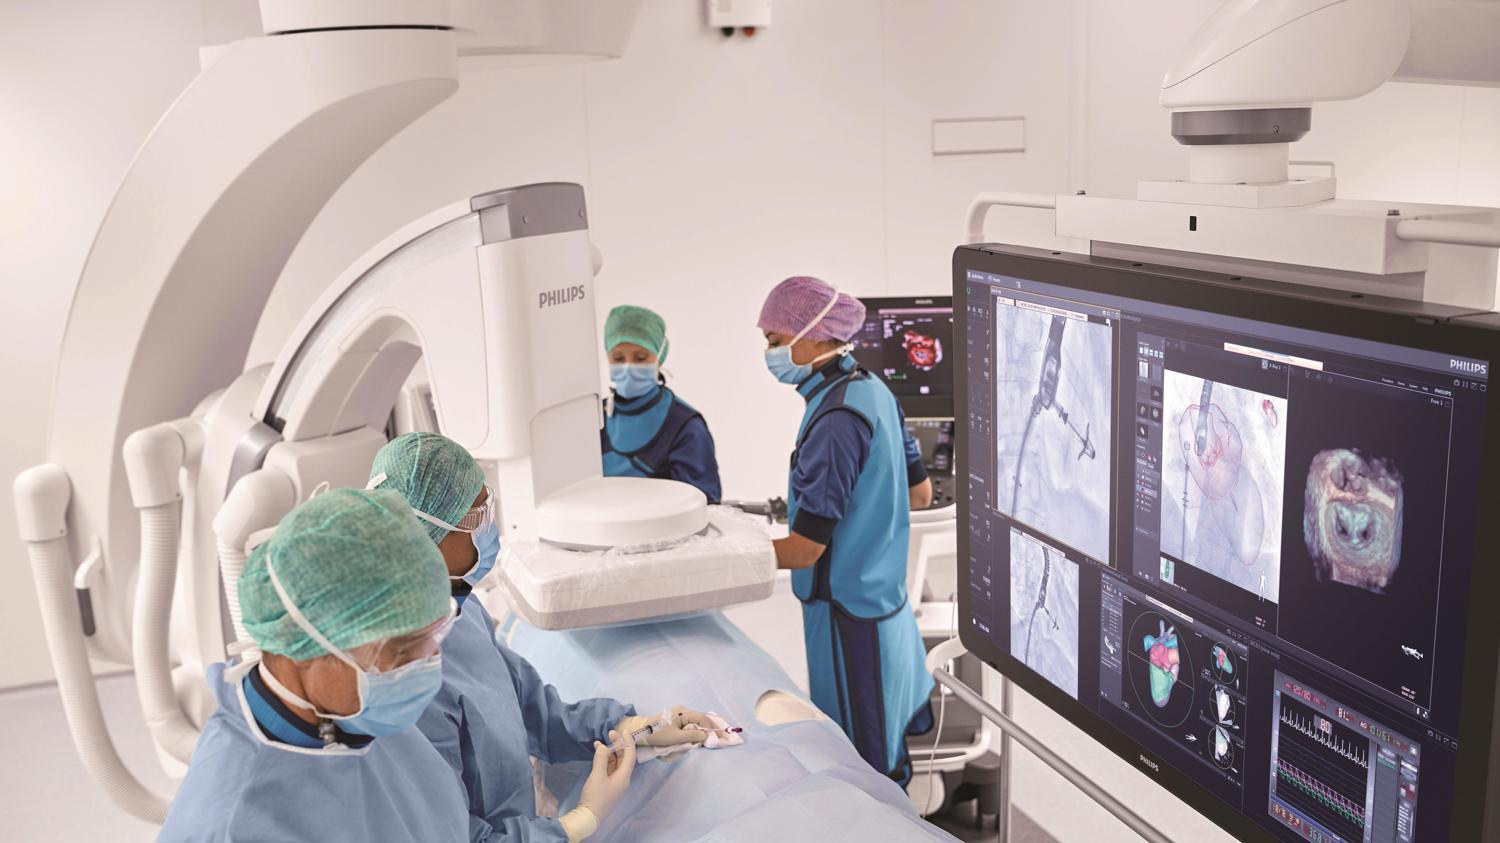 Nurses perform a scan with Philips Eindhoven's equipment | Brabant Brand Box